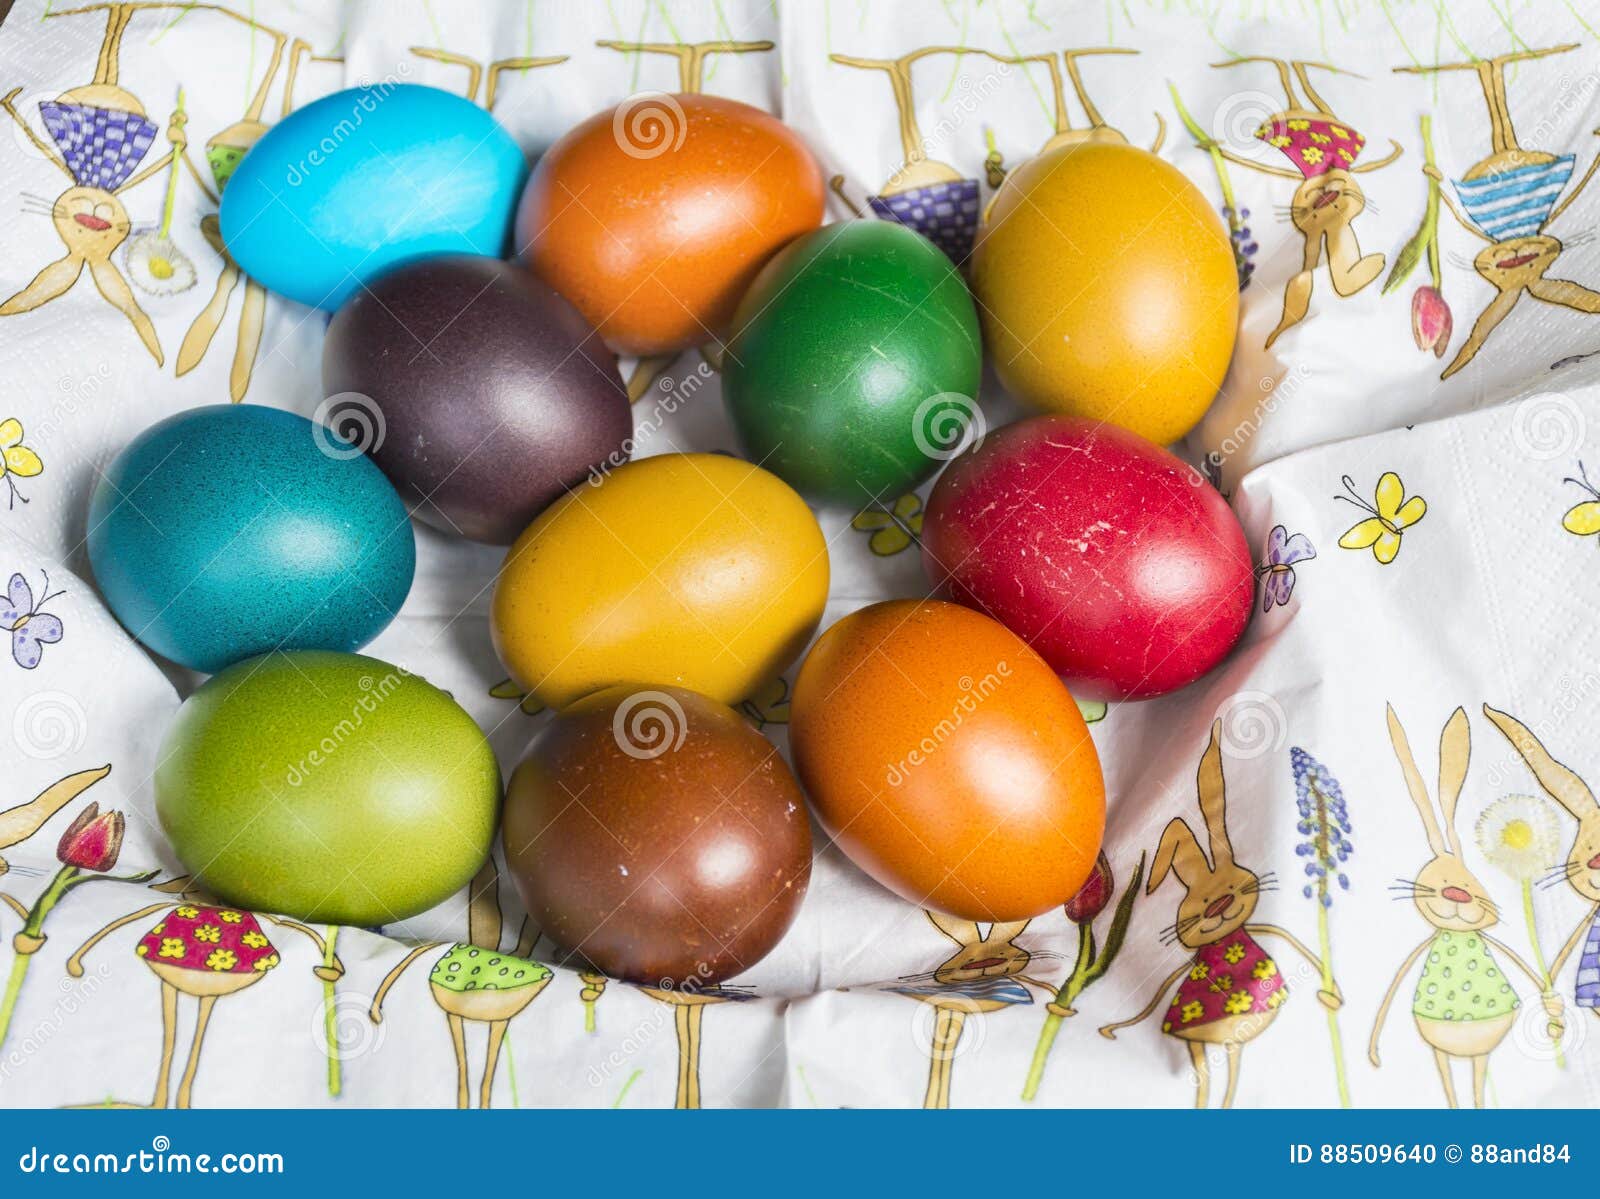 Easter eggs and rabbits stock photo. Image of design - 88509640